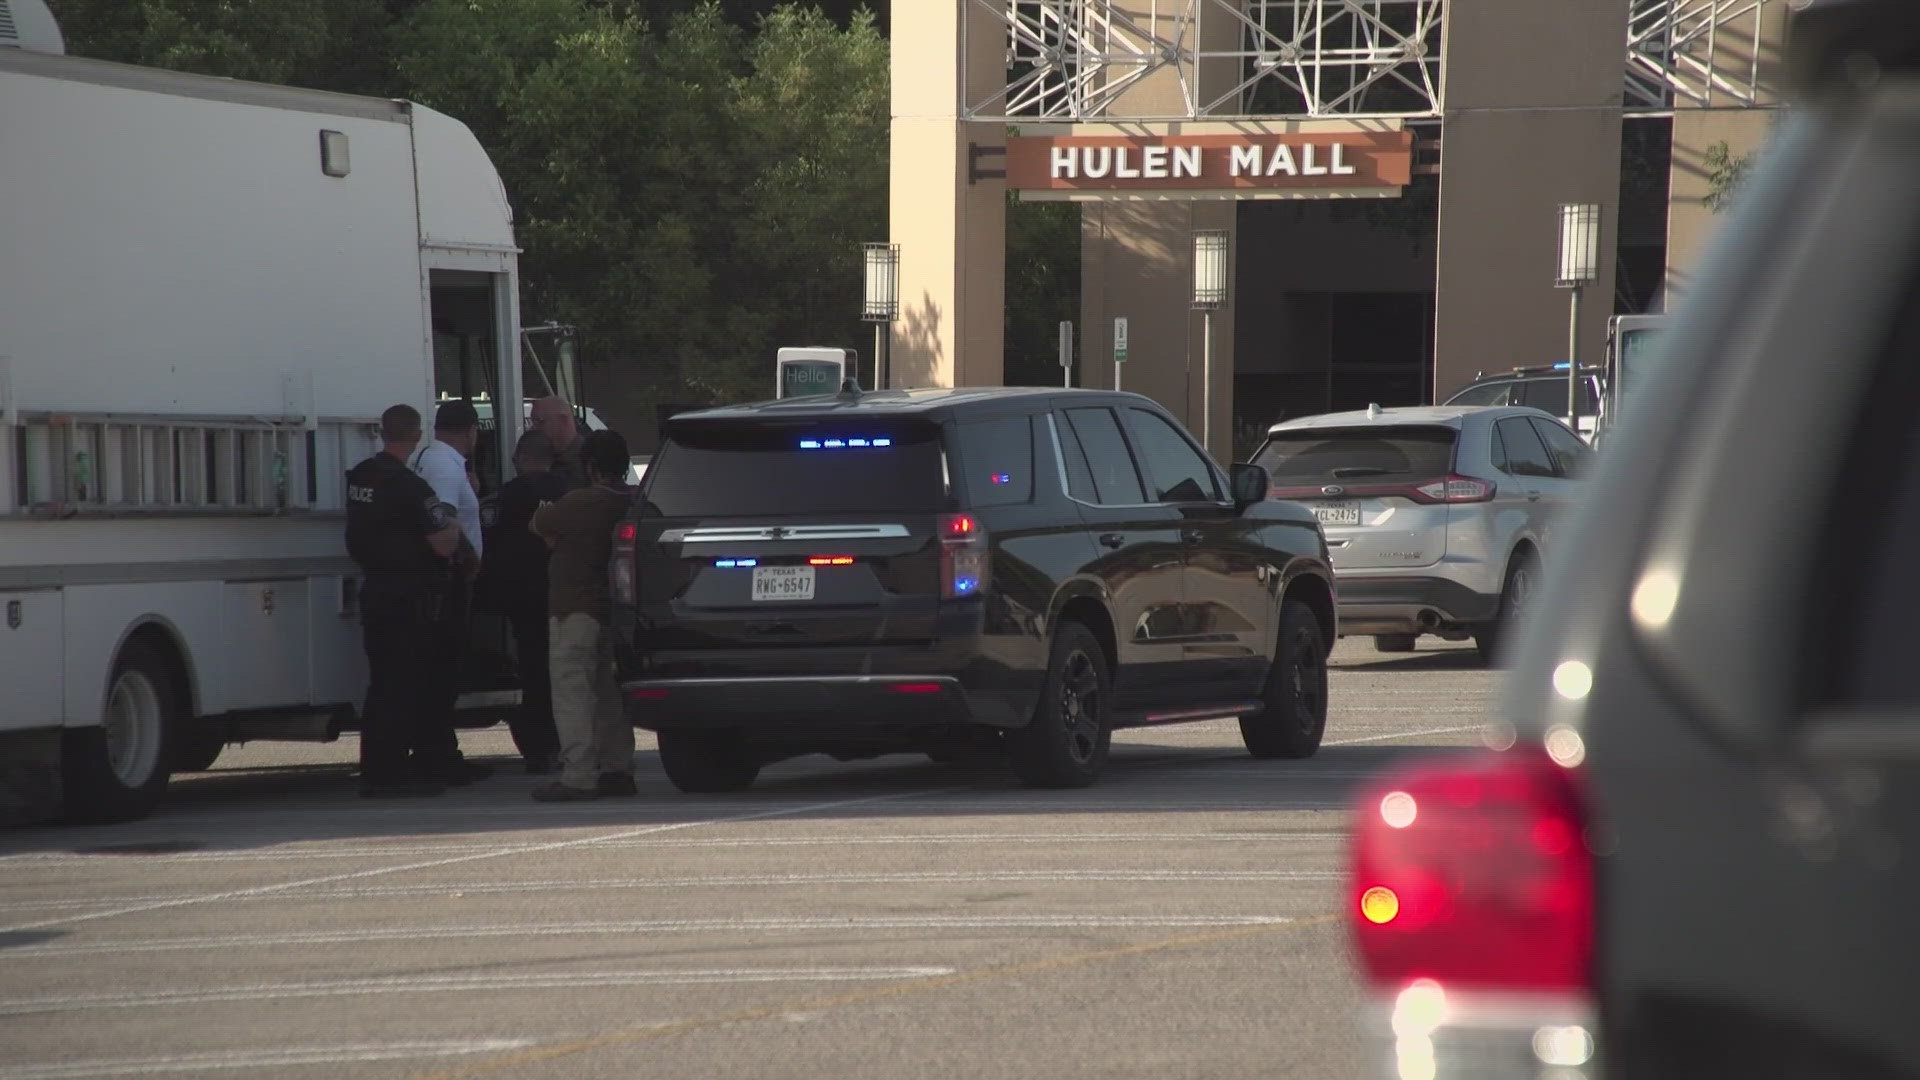 Hulen Mall: Fort Worth police find no sign of shooting, bomb | wfaa.com